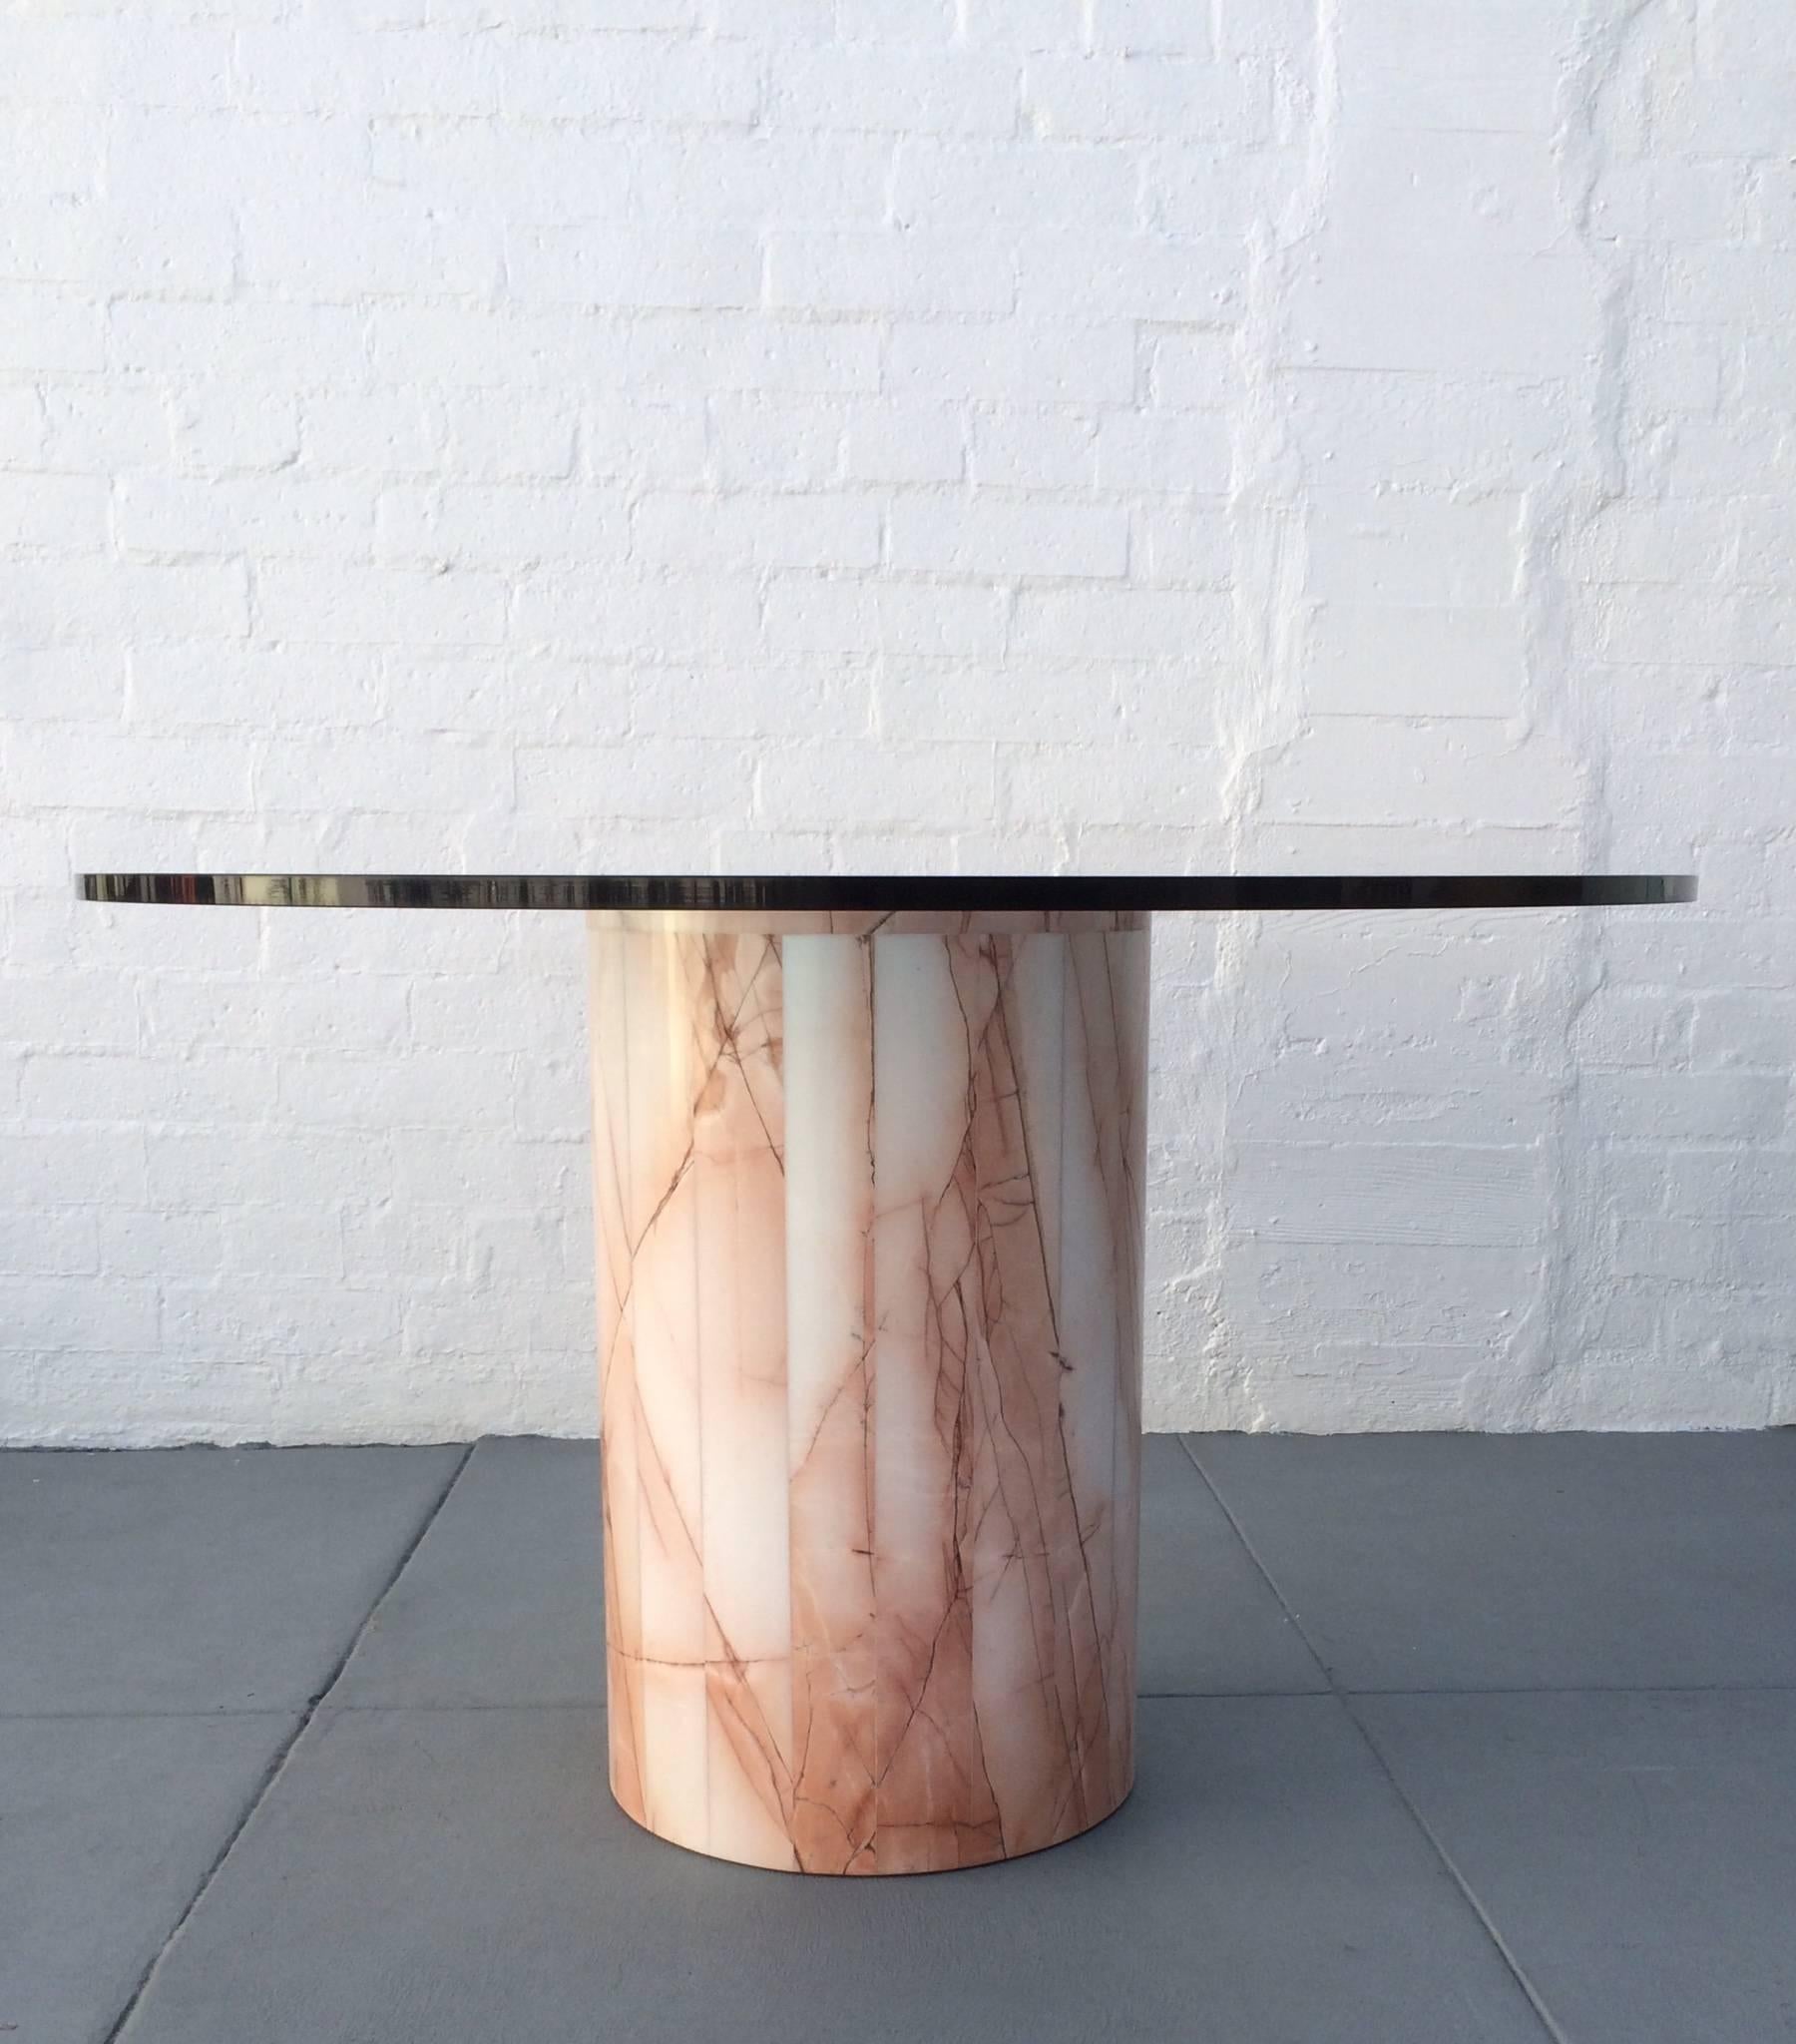 Stunning multicolor Italian marble table base with a round 48 inch diameter 3/4 inch thick glass top.
This beautiful marble base has tones of pink with white and hints of gray.
Can also be used alone as a pedestal.